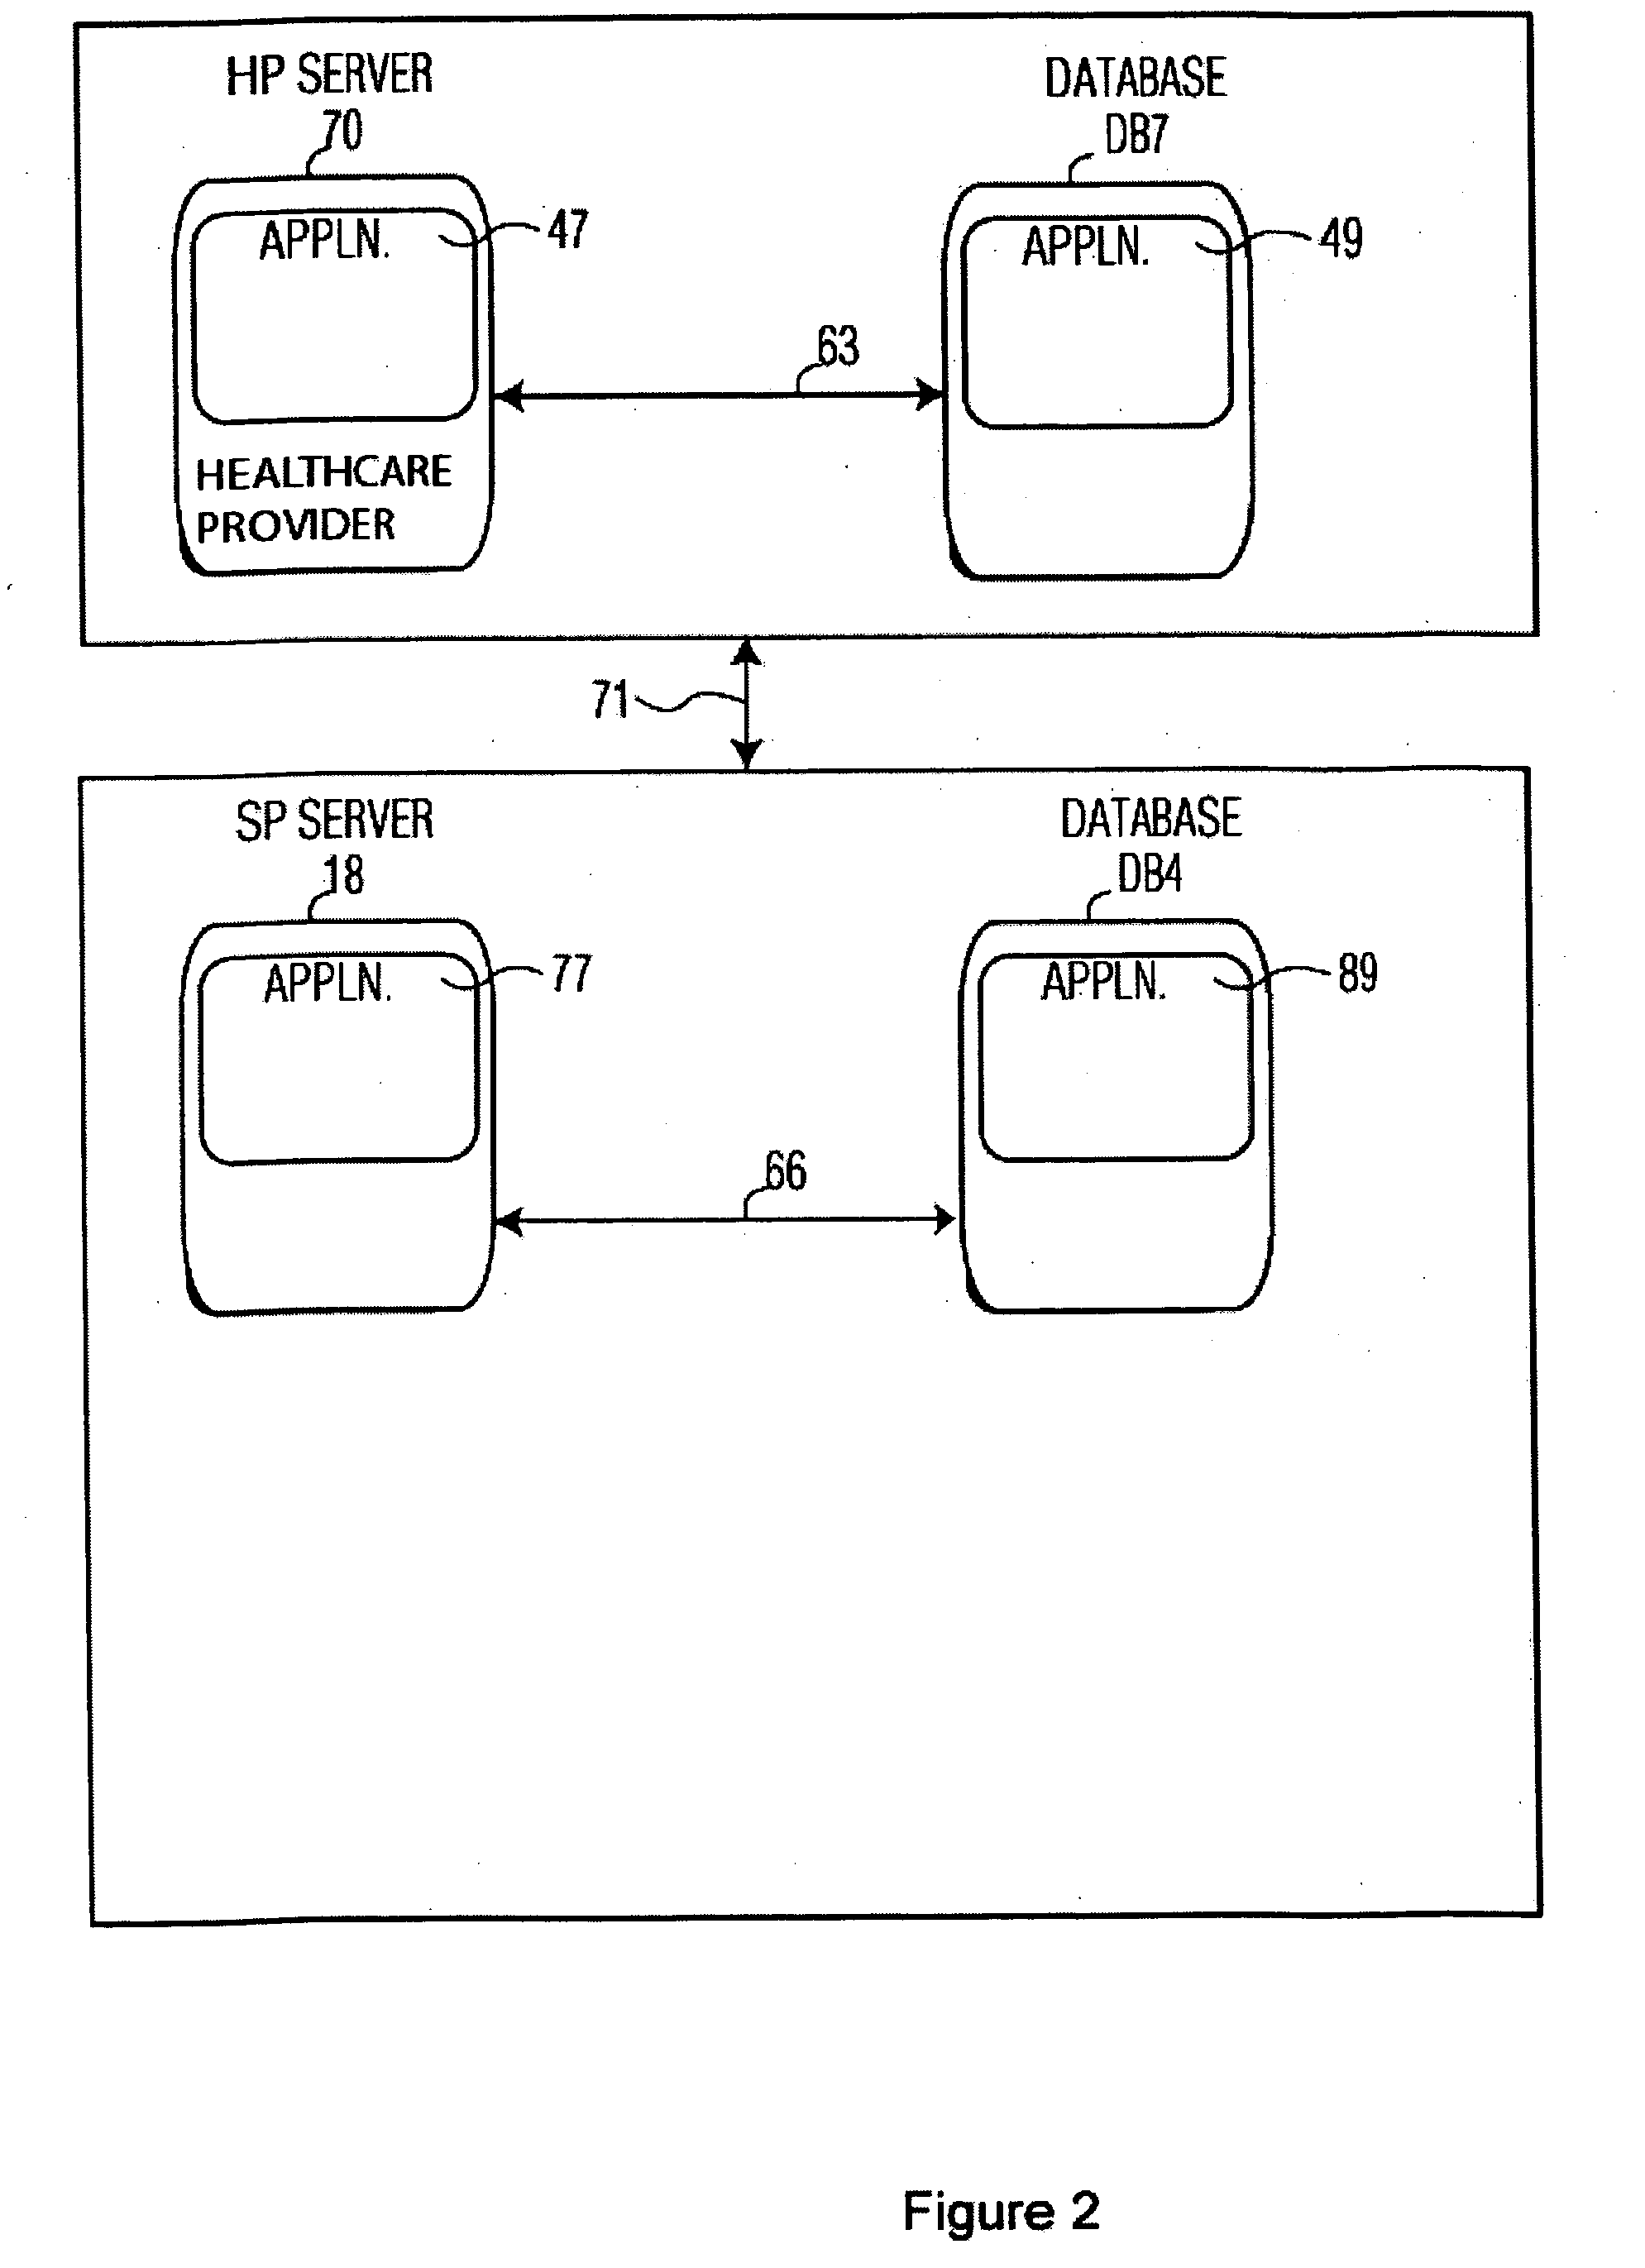 System for processing patient medical data for clinical trials and aggregate analysis